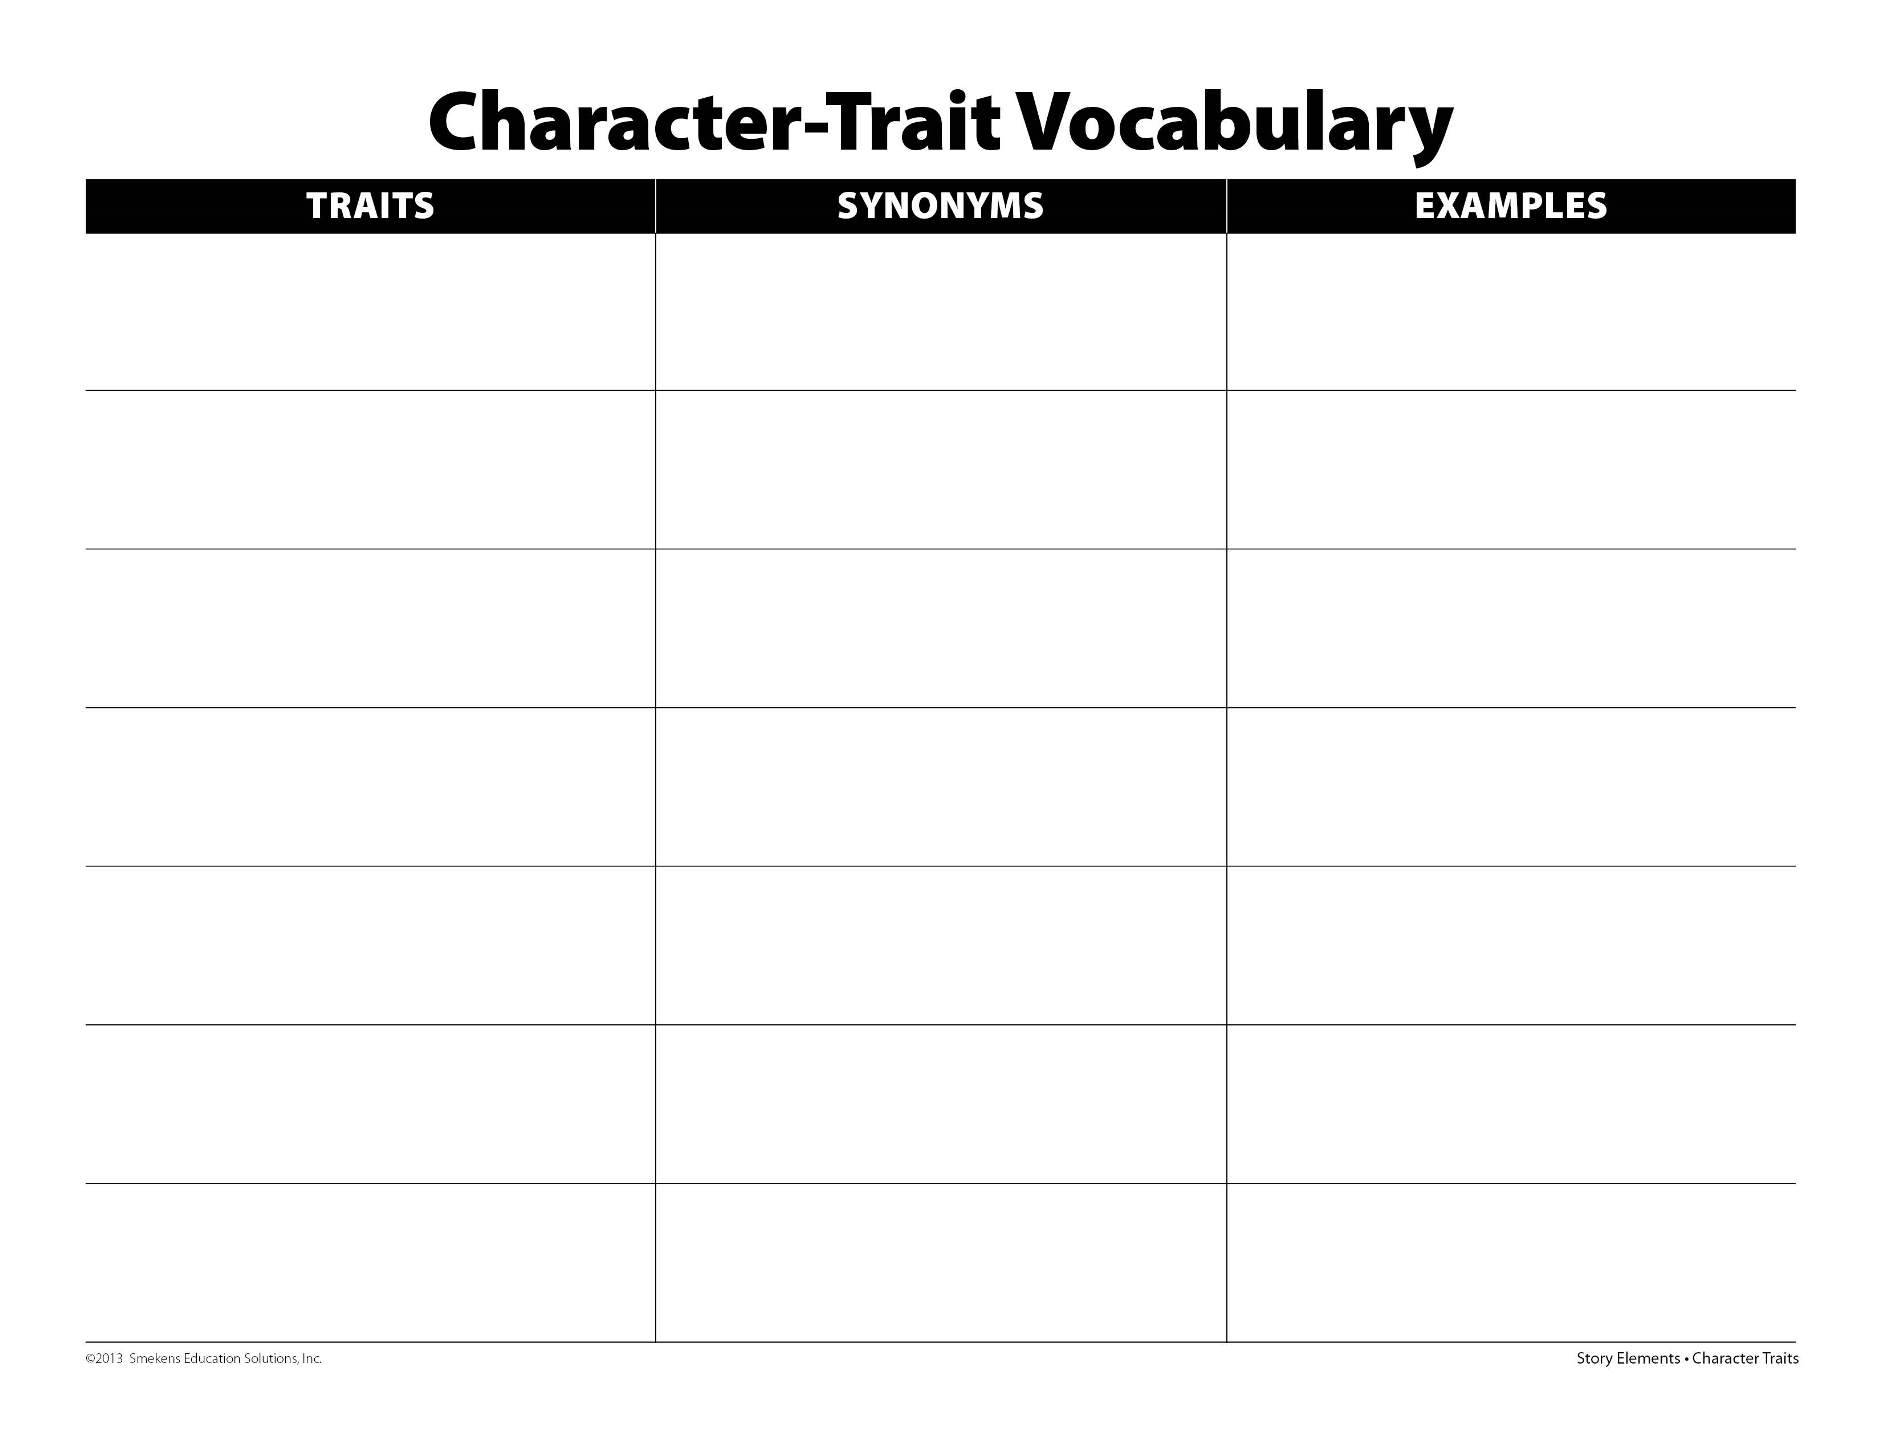 Character-Trait Vocabulary Template